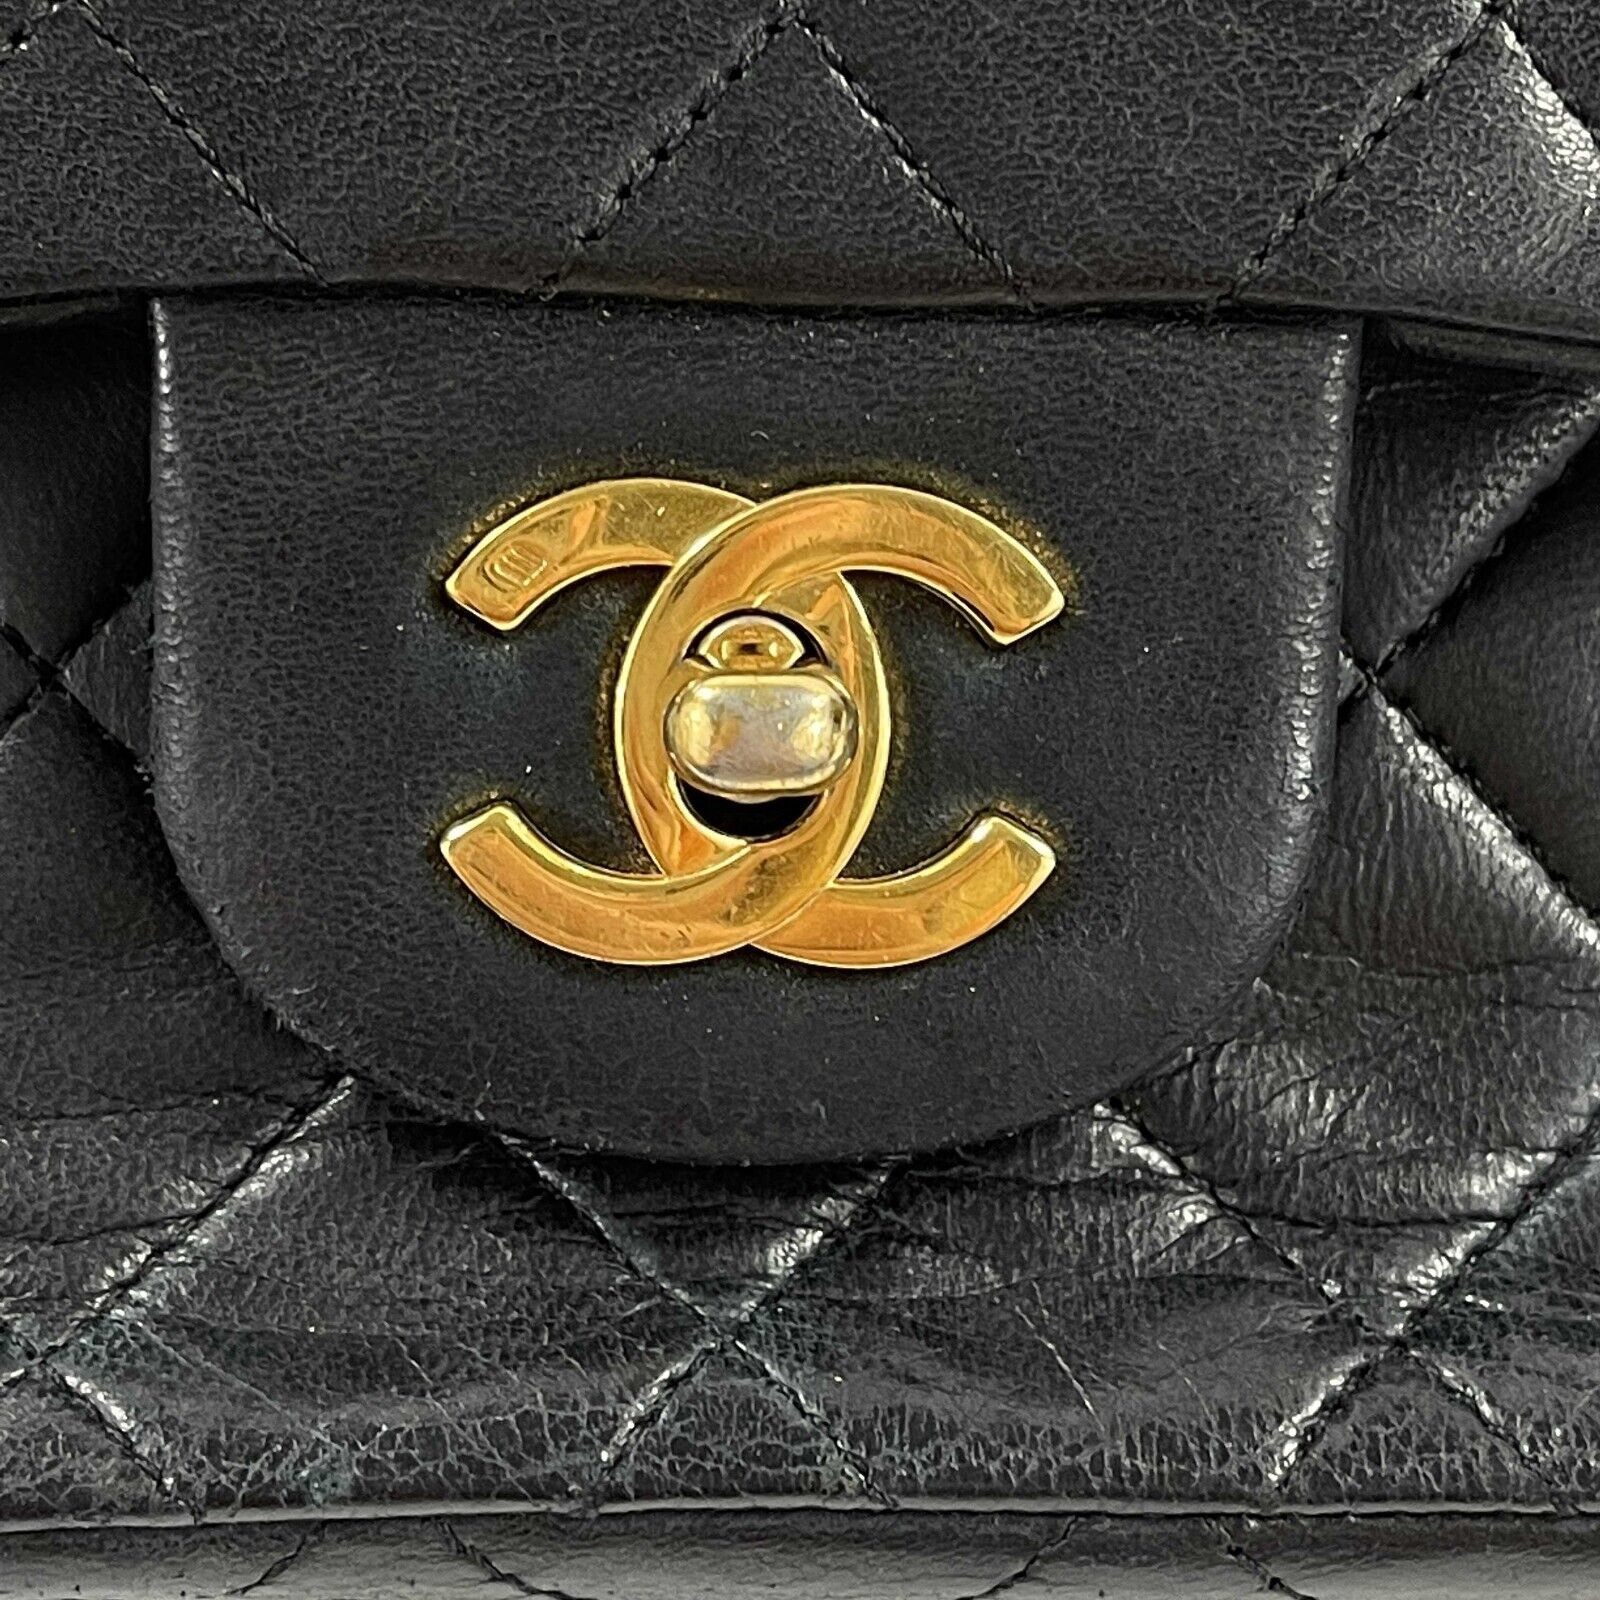 vintage chanel crossbody bags authentic